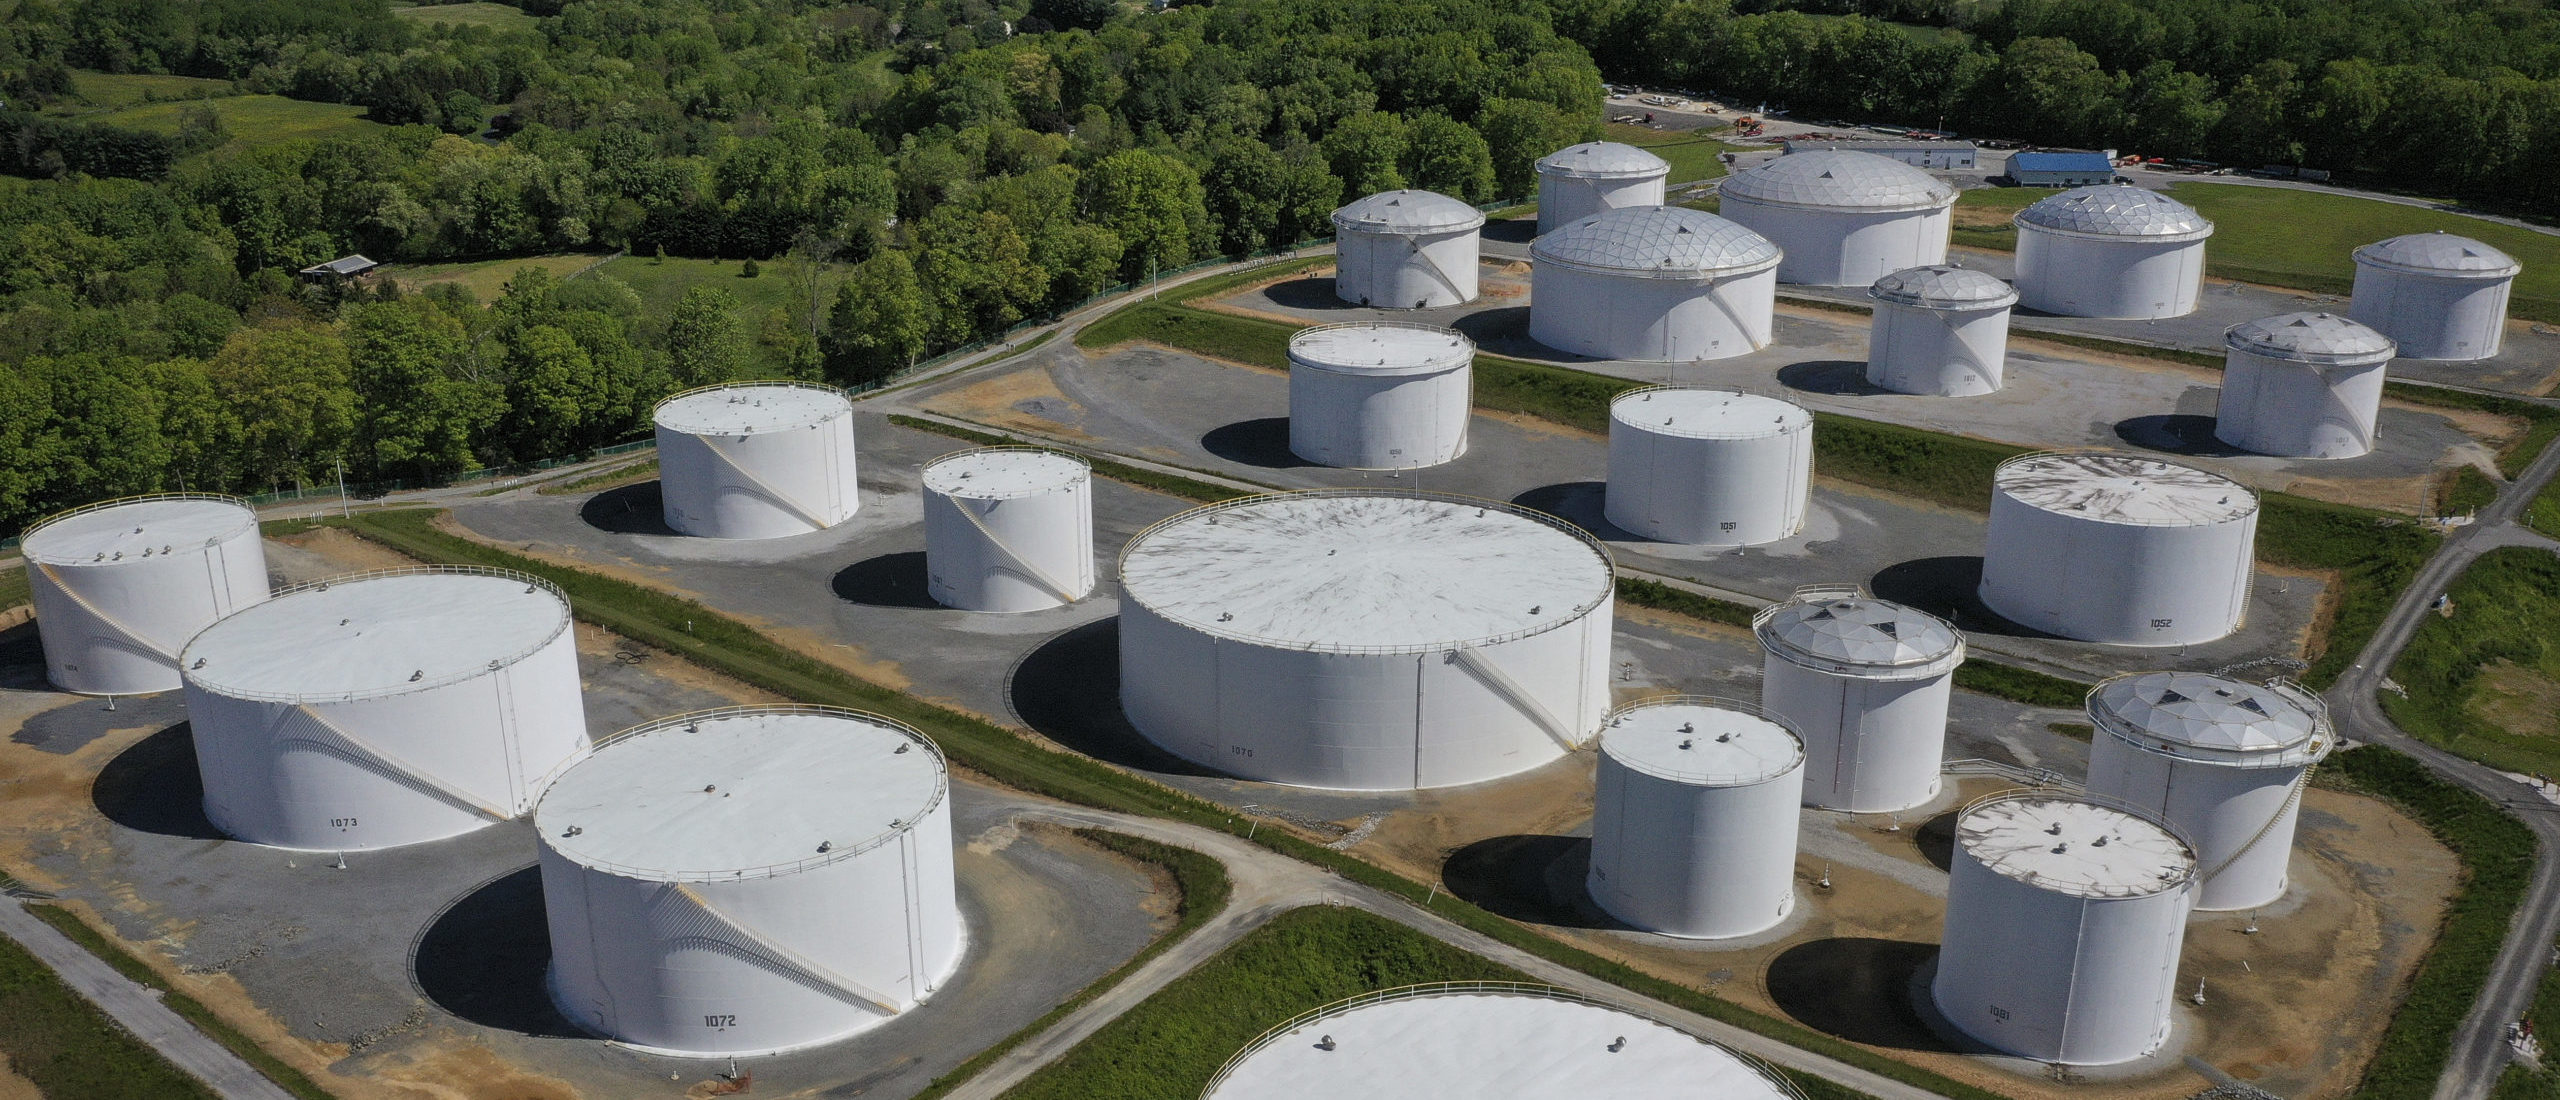 In an aerial view, fuel holding tanks are seen at Colonial Pipeline's Dorsey Junction Station on May 13, 2021 in Woodbine, Maryland. (Photo by Drew Angerer/Getty Images)